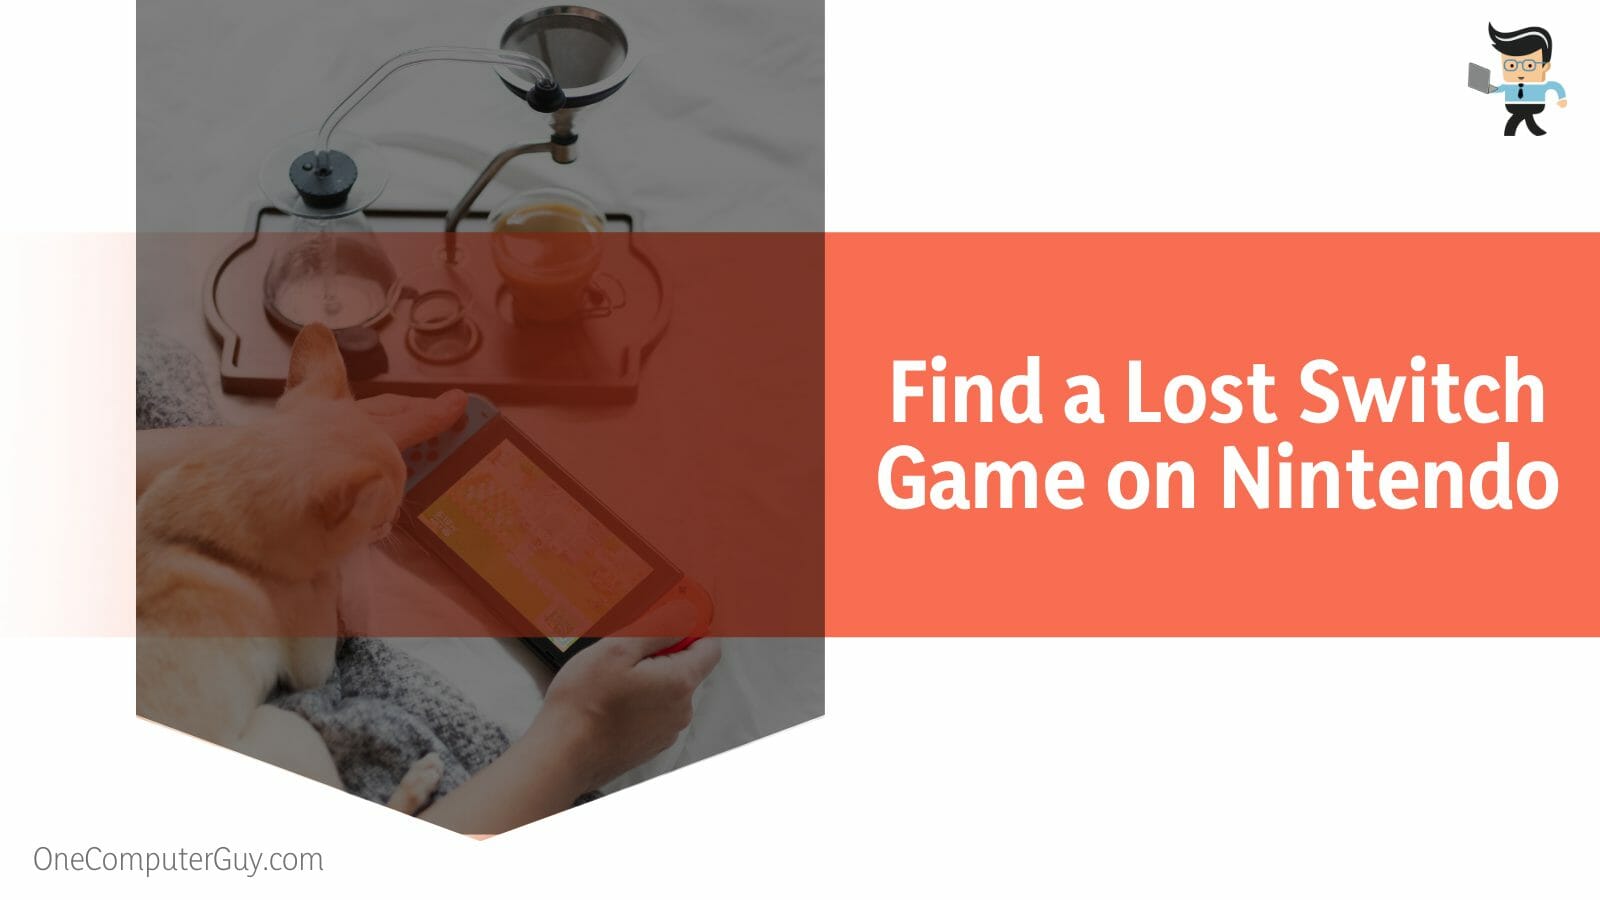 Find a Lost Switch Game on Nintendo